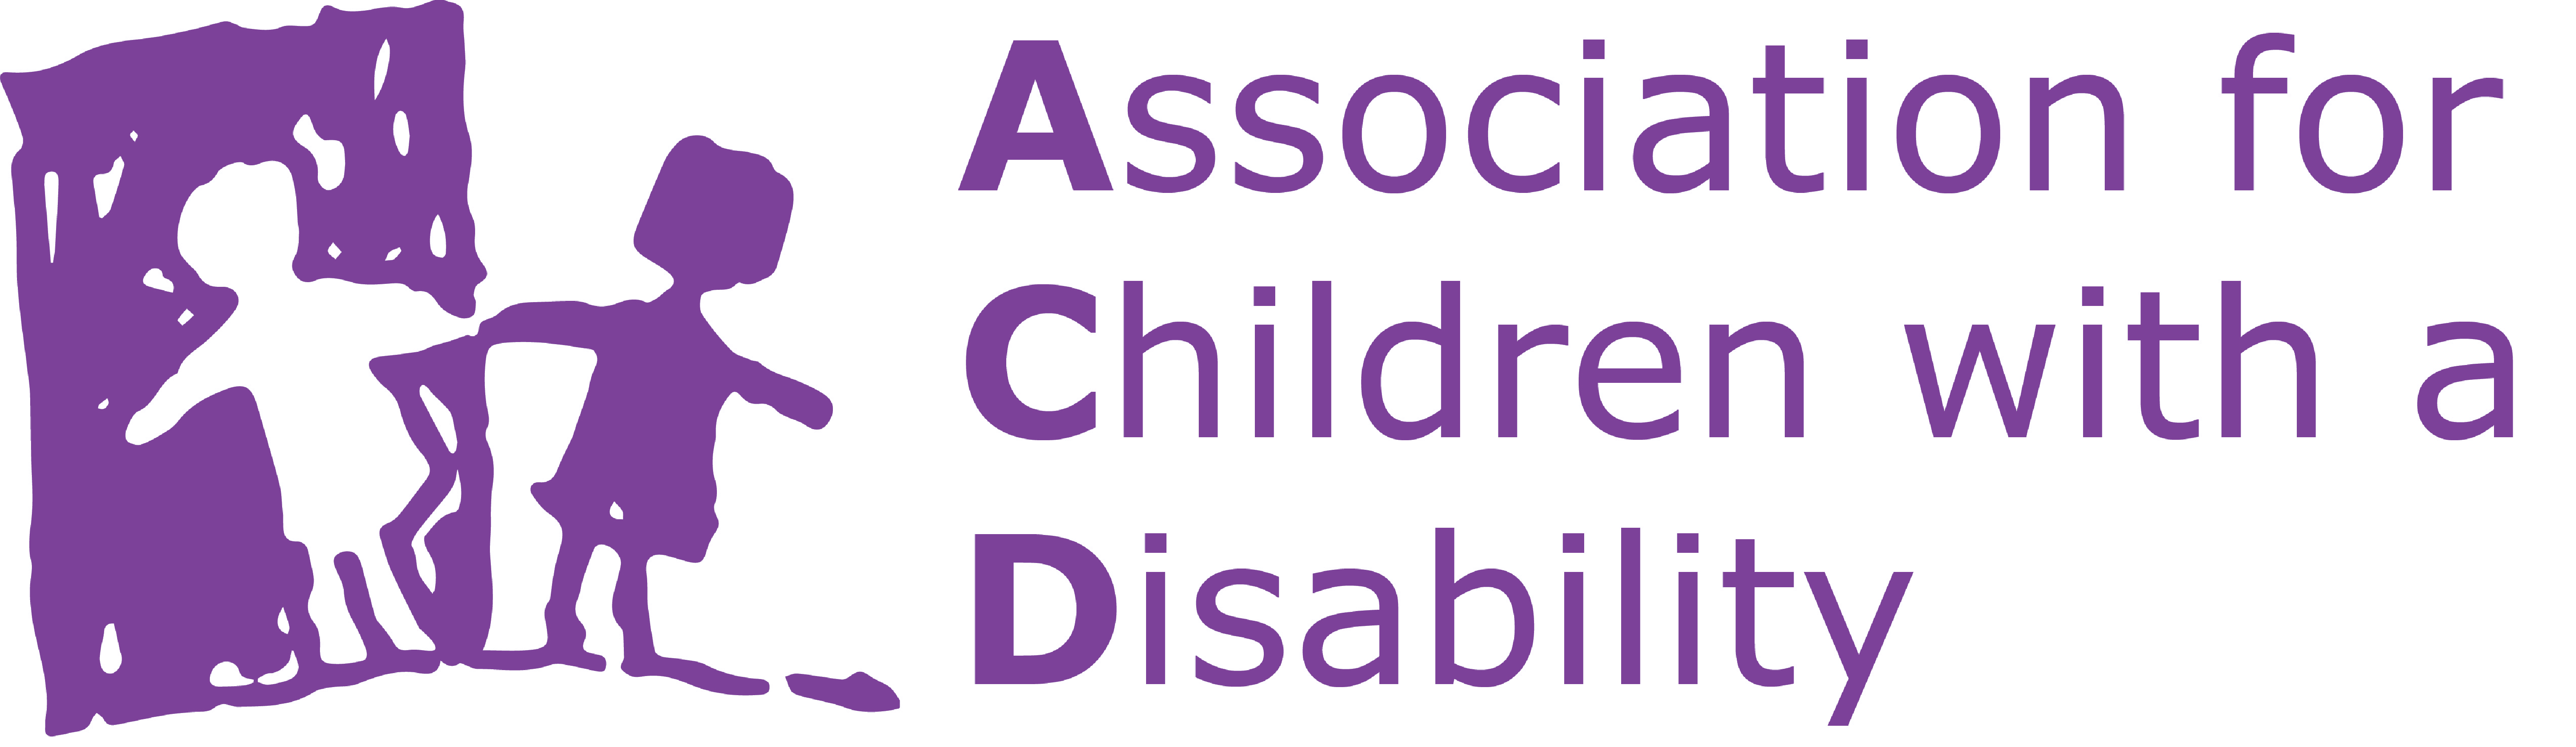 The Association for Children with a Disability logo.